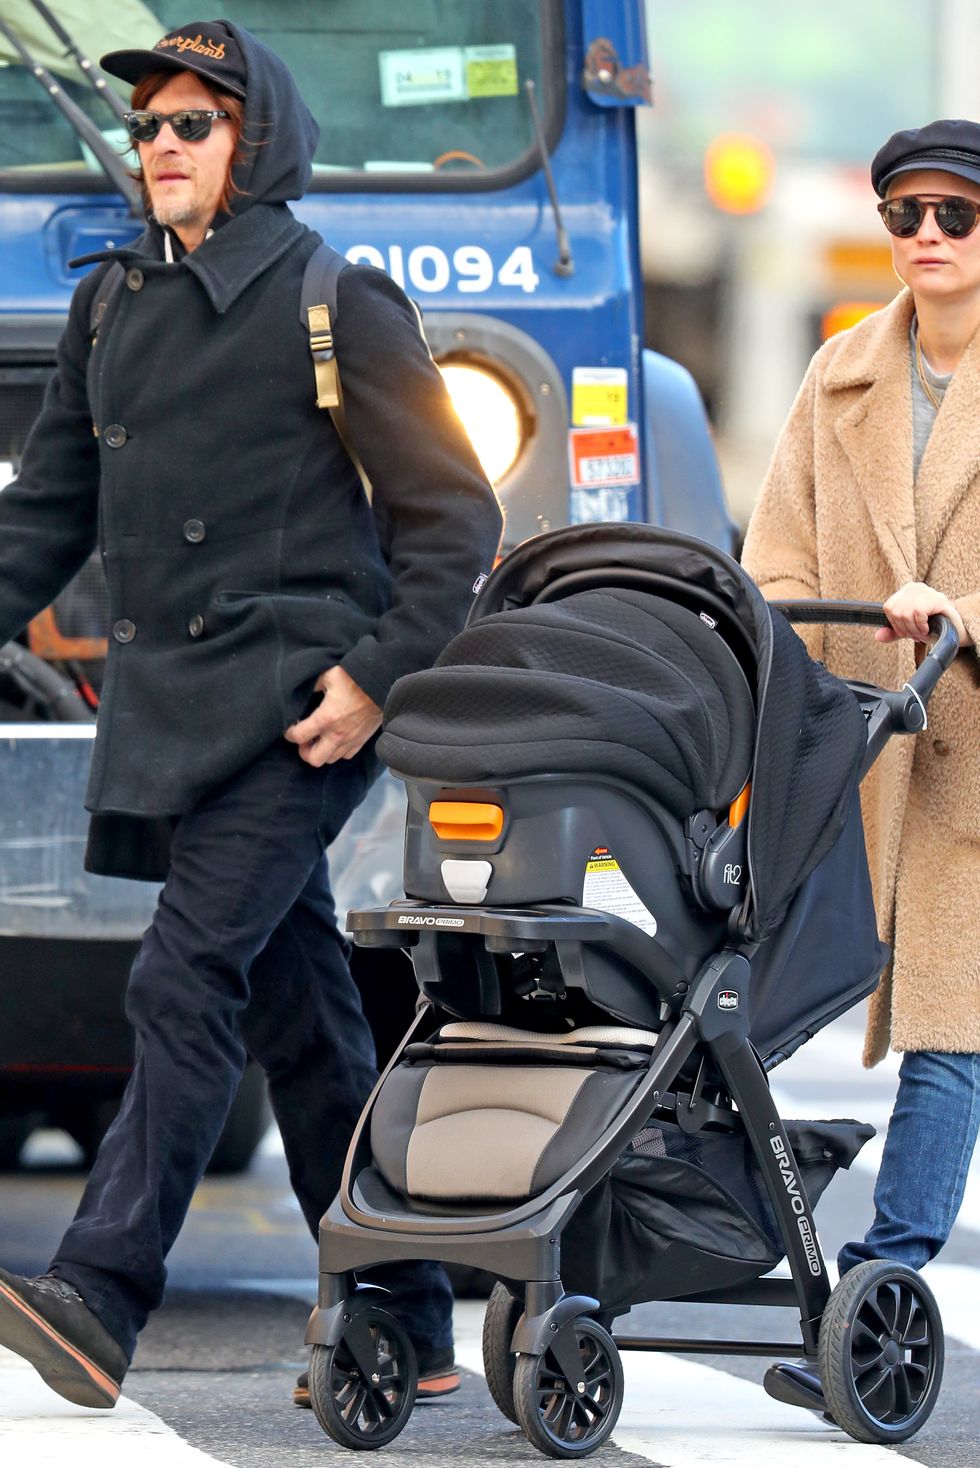 Diane Kruger and Norman Reedus Are Spotted Out Walking With Their Baby For The First Time in New York City